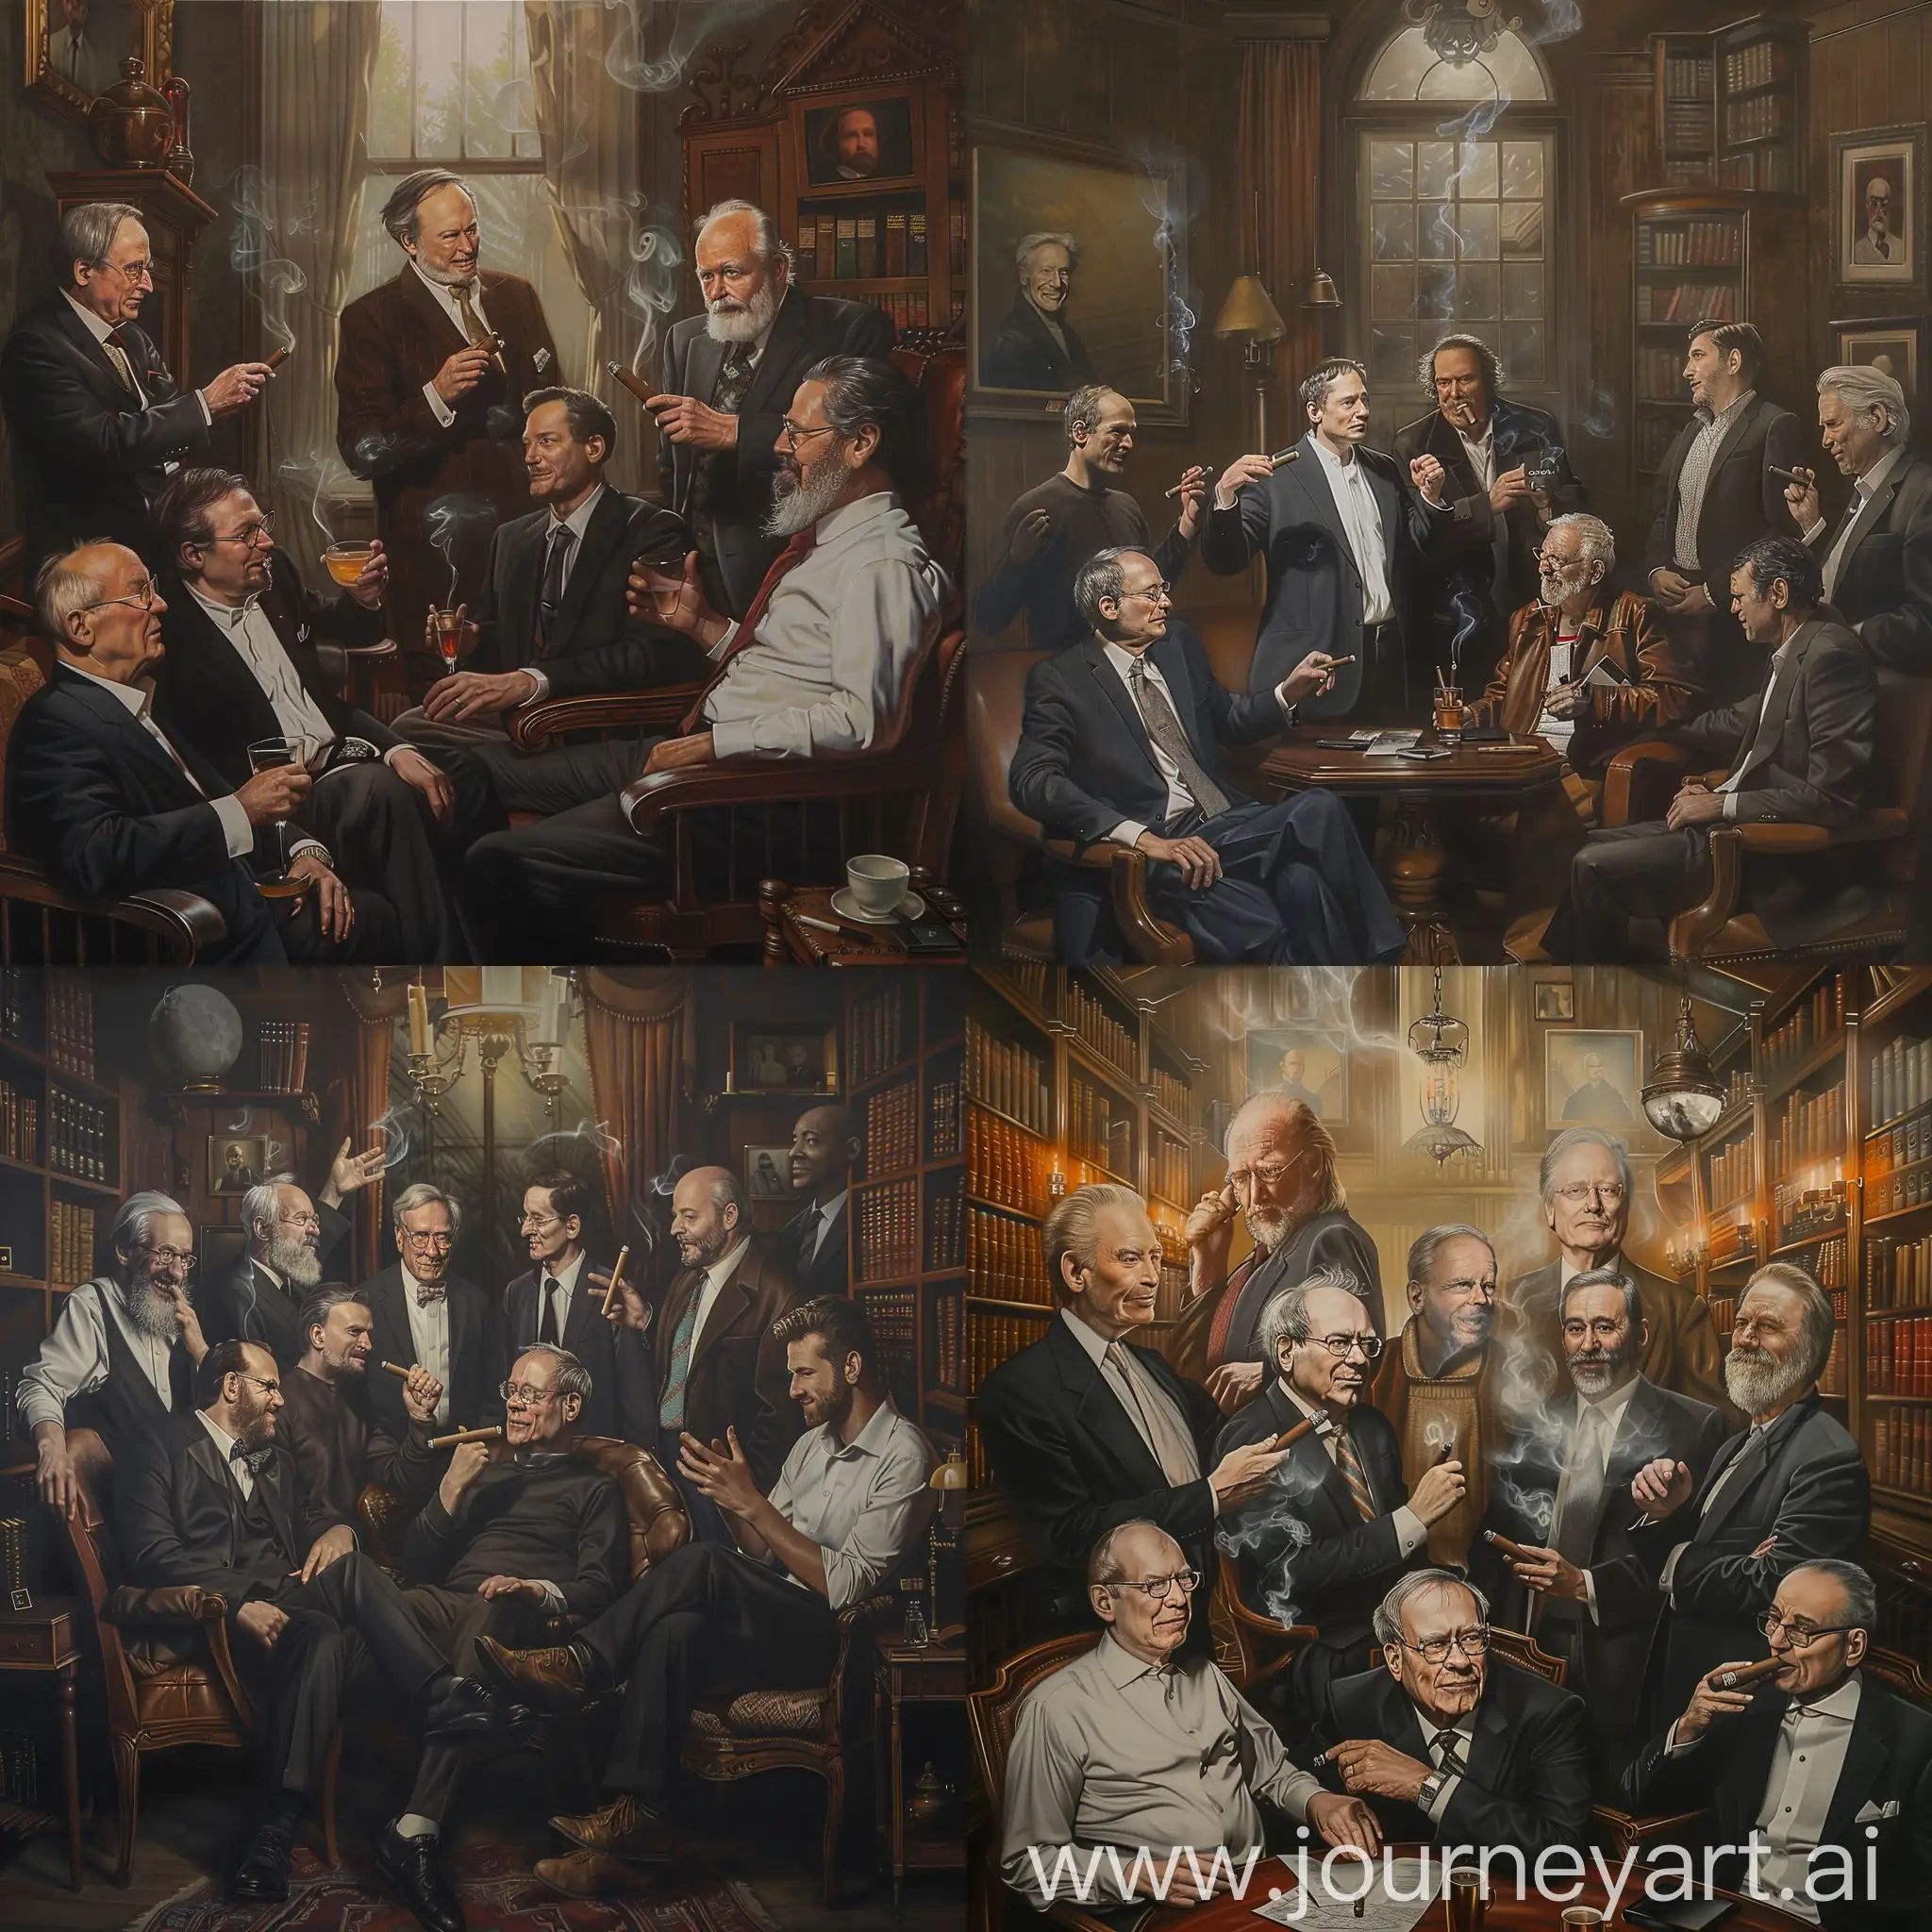 A highly realistic mural capturing elon musk, Steve Jobs, Warren Buffet John D Rockefeller, Sam Walton Andrew Carnegie, Grant Cardone, in an elegant, dimly lit study, each holding a cigar. They are depicted in mid-conversation, with the ambiance of the room reflecting a sense of history and future possibilities